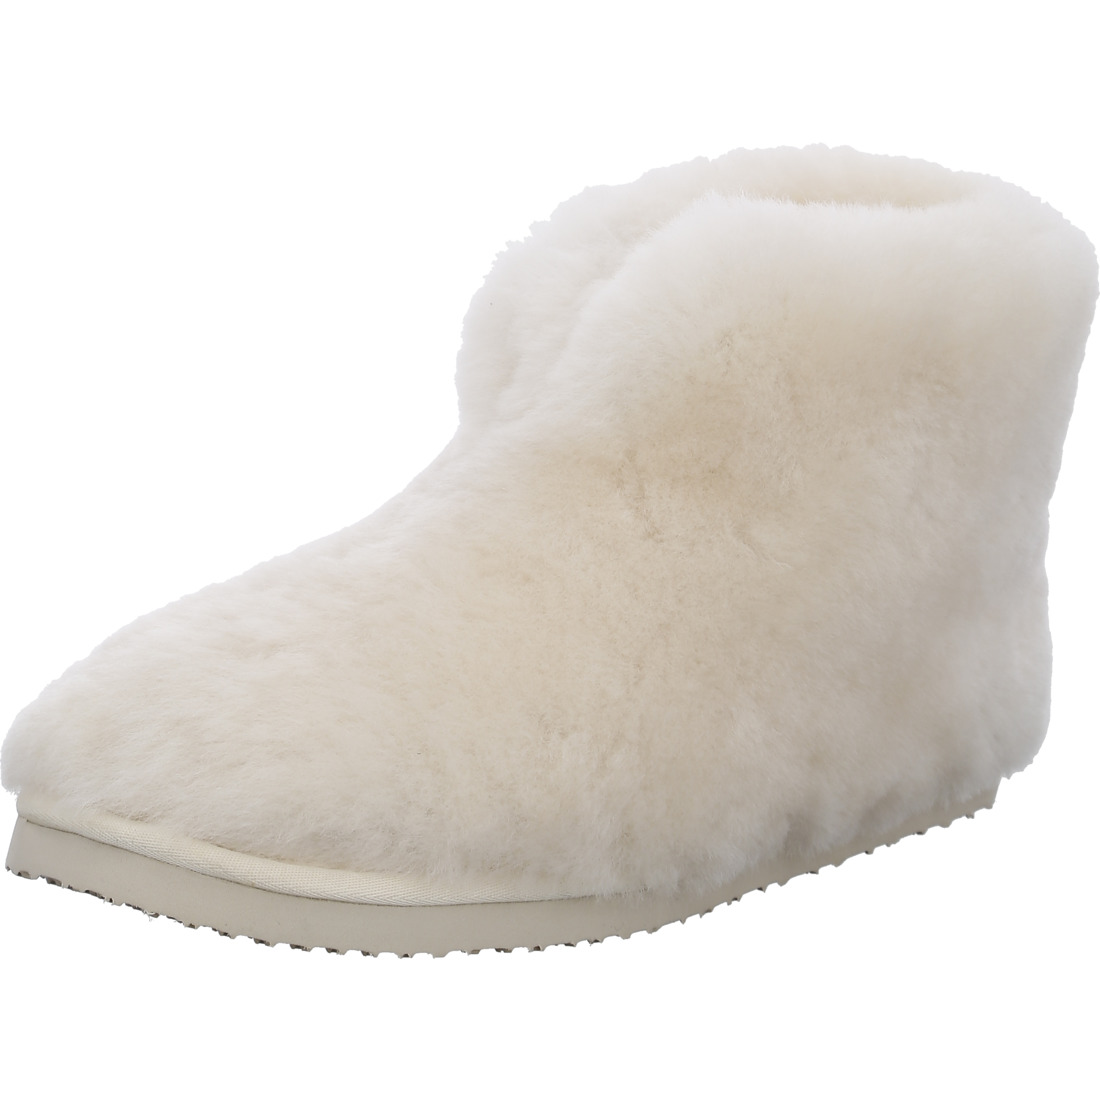 Chaussons*Ara Shoes Chaussons Chaussons Cosy blanc cassé